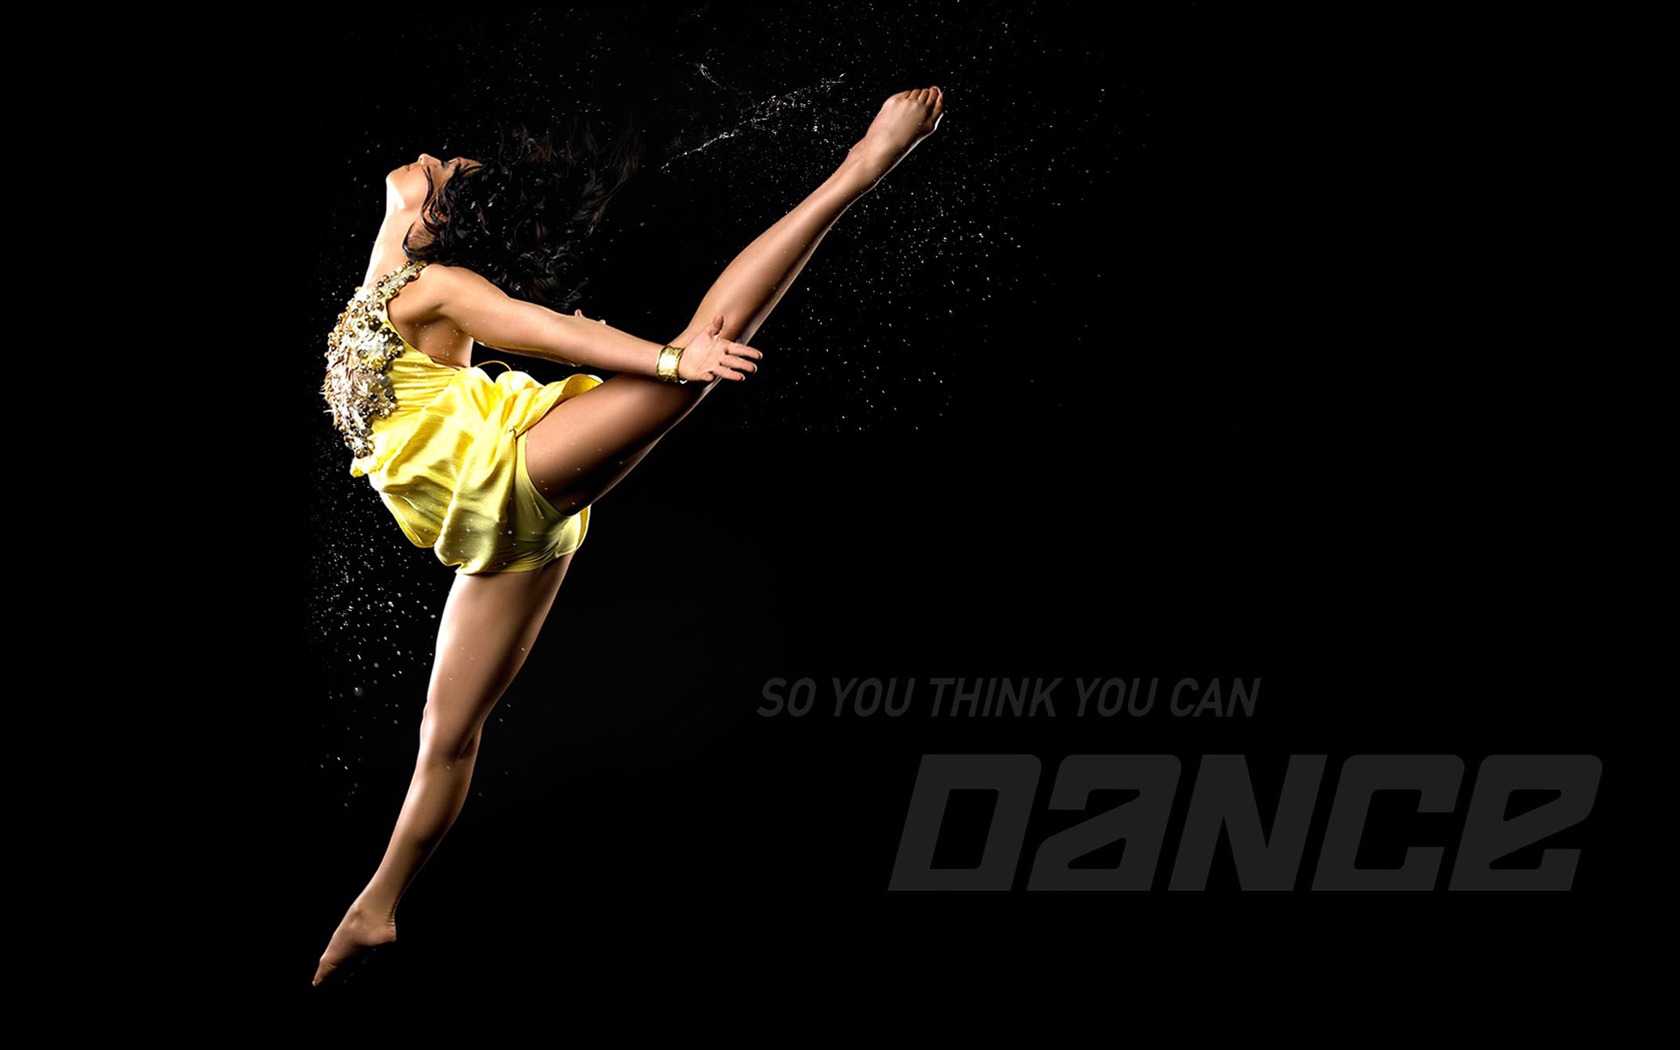 So You Think You Can Dance 舞林争霸 壁纸(一)19 - 1680x1050